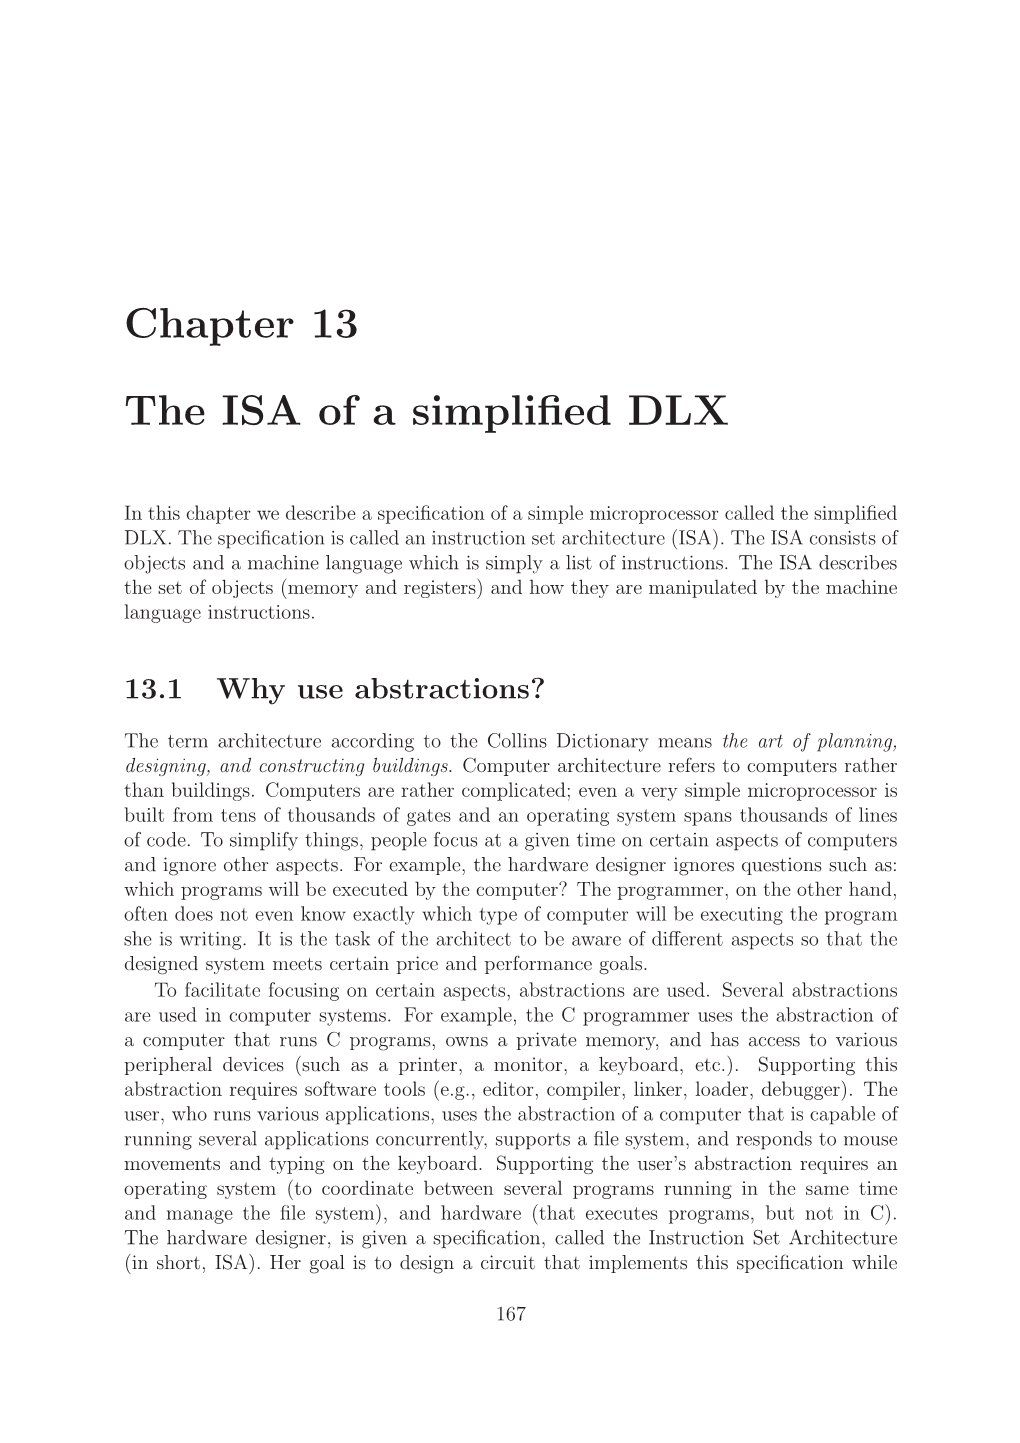 Chapter 13 the ISA of a Simplified